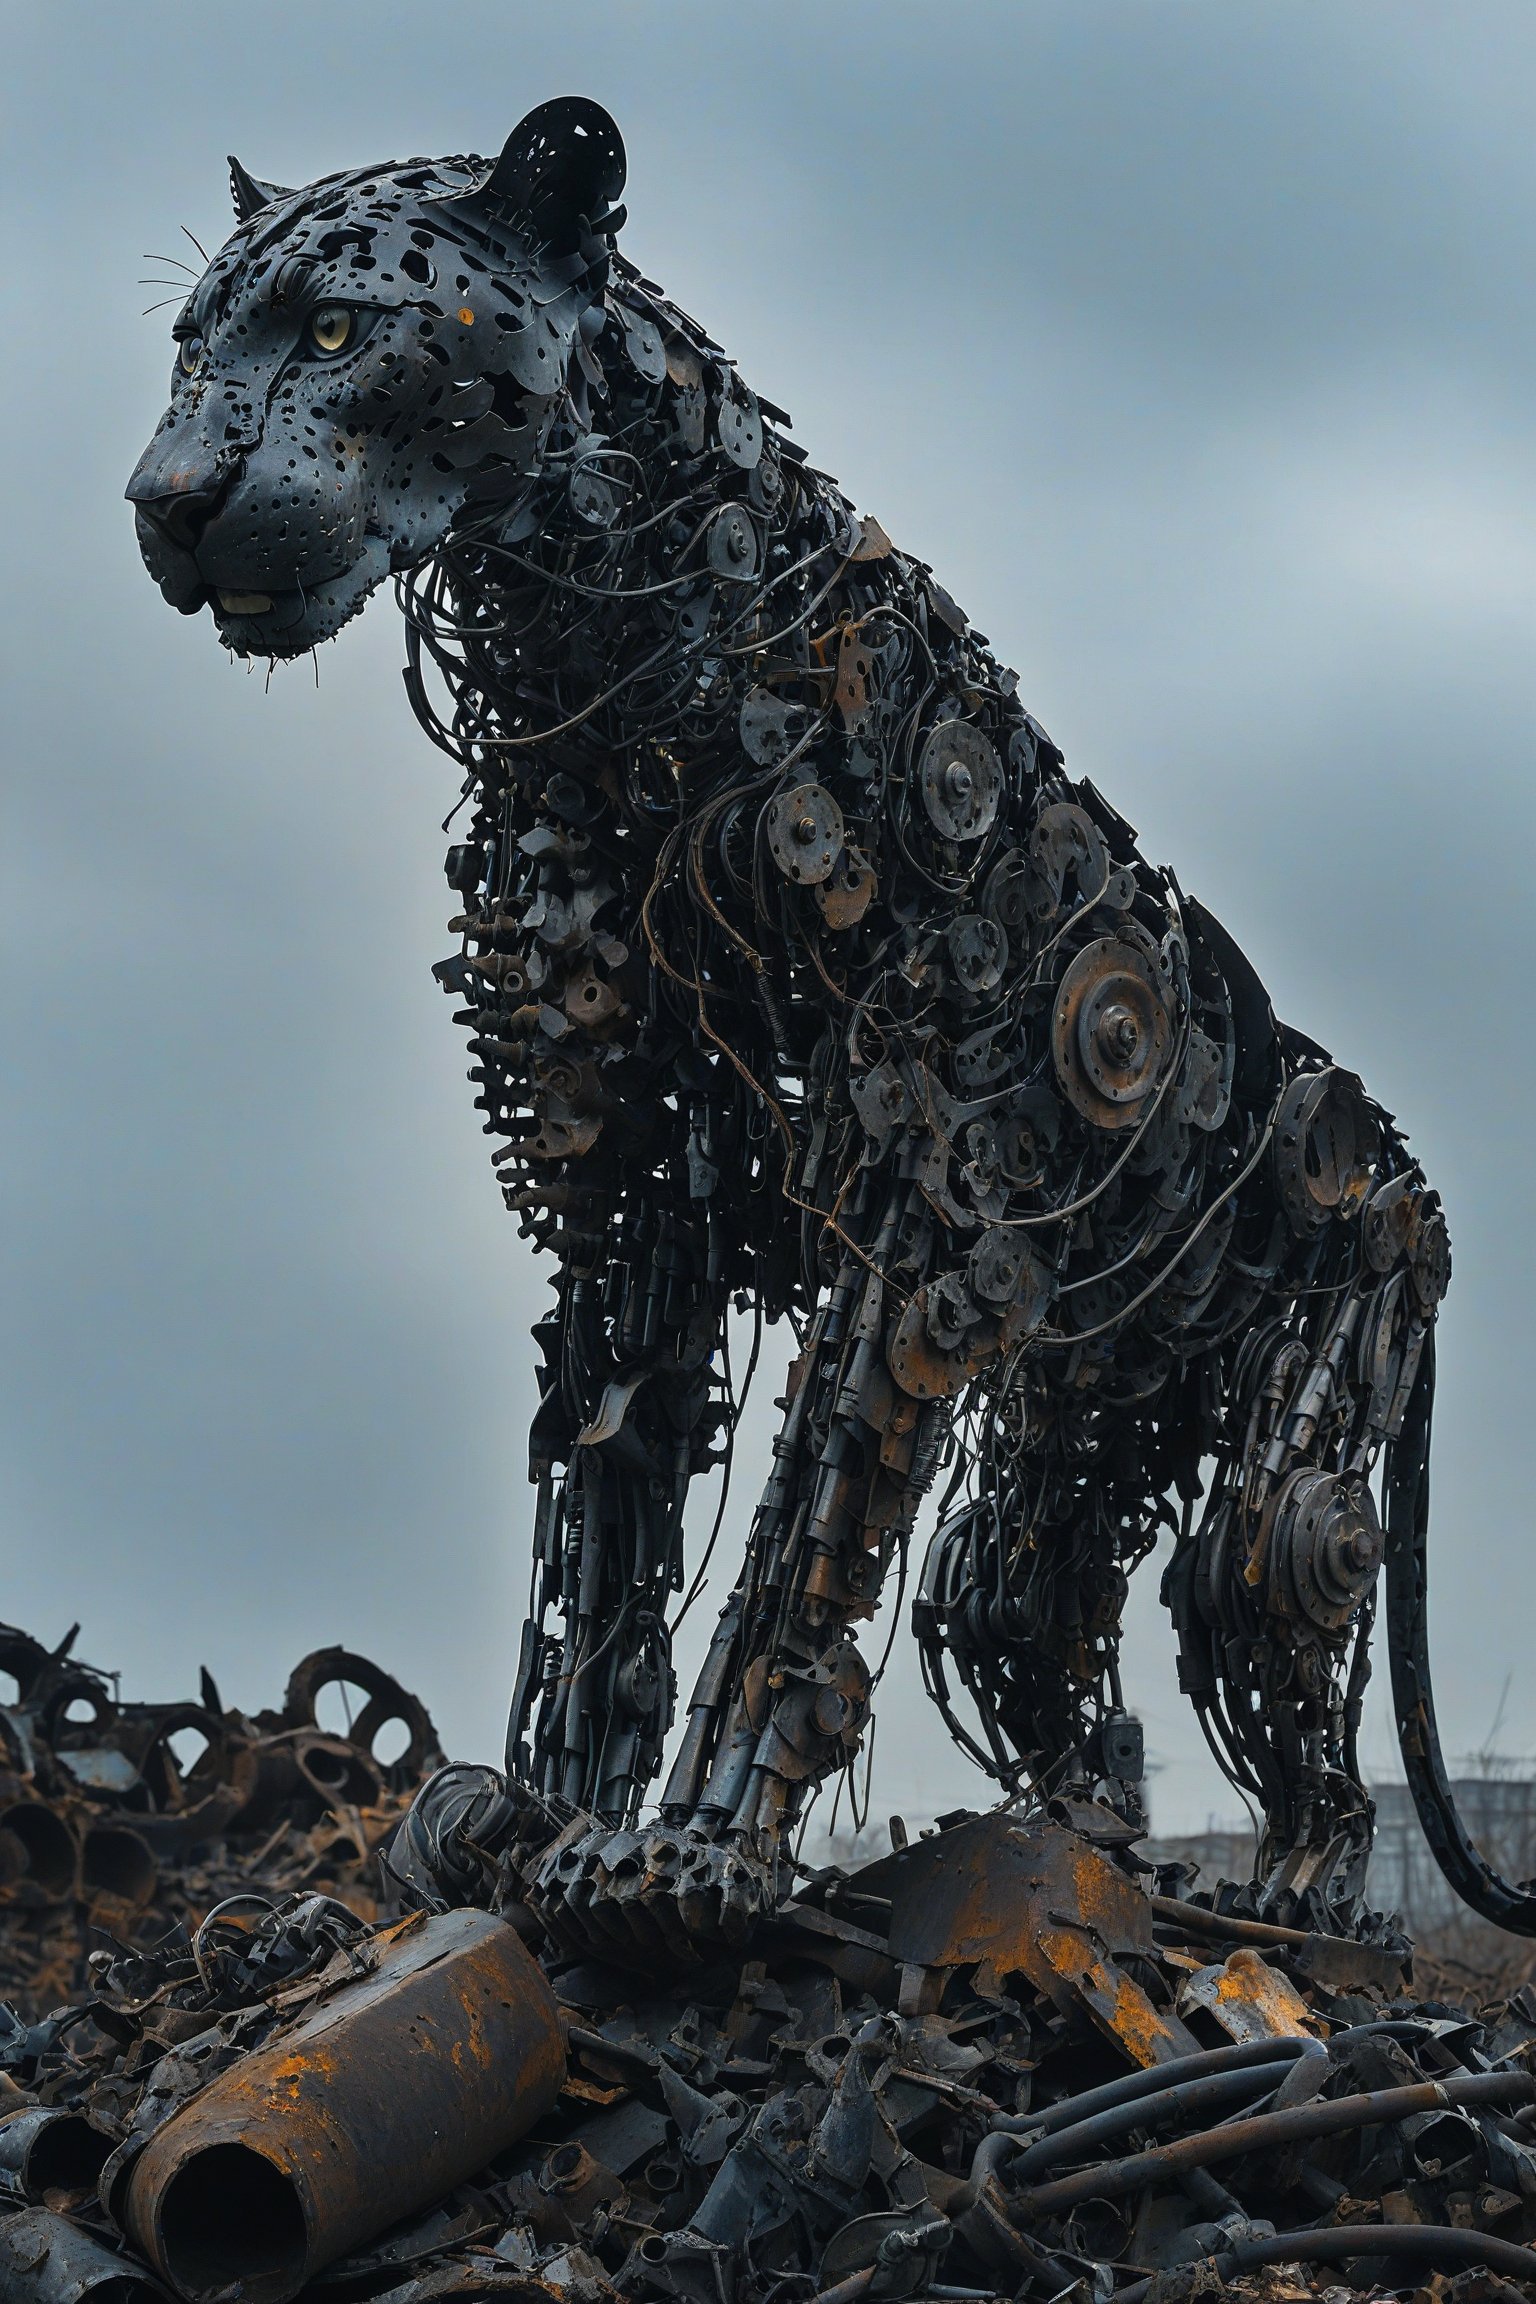 A towering, intricately constructed mechanical panther standing atop a mound of discarded metal and debris. The panther appears to be made of various metal parts, wires, and tools, giving it a skeletal and mechanical appearance. The background is overcast, adding a somber and post-apocalyptic feel to the scene.